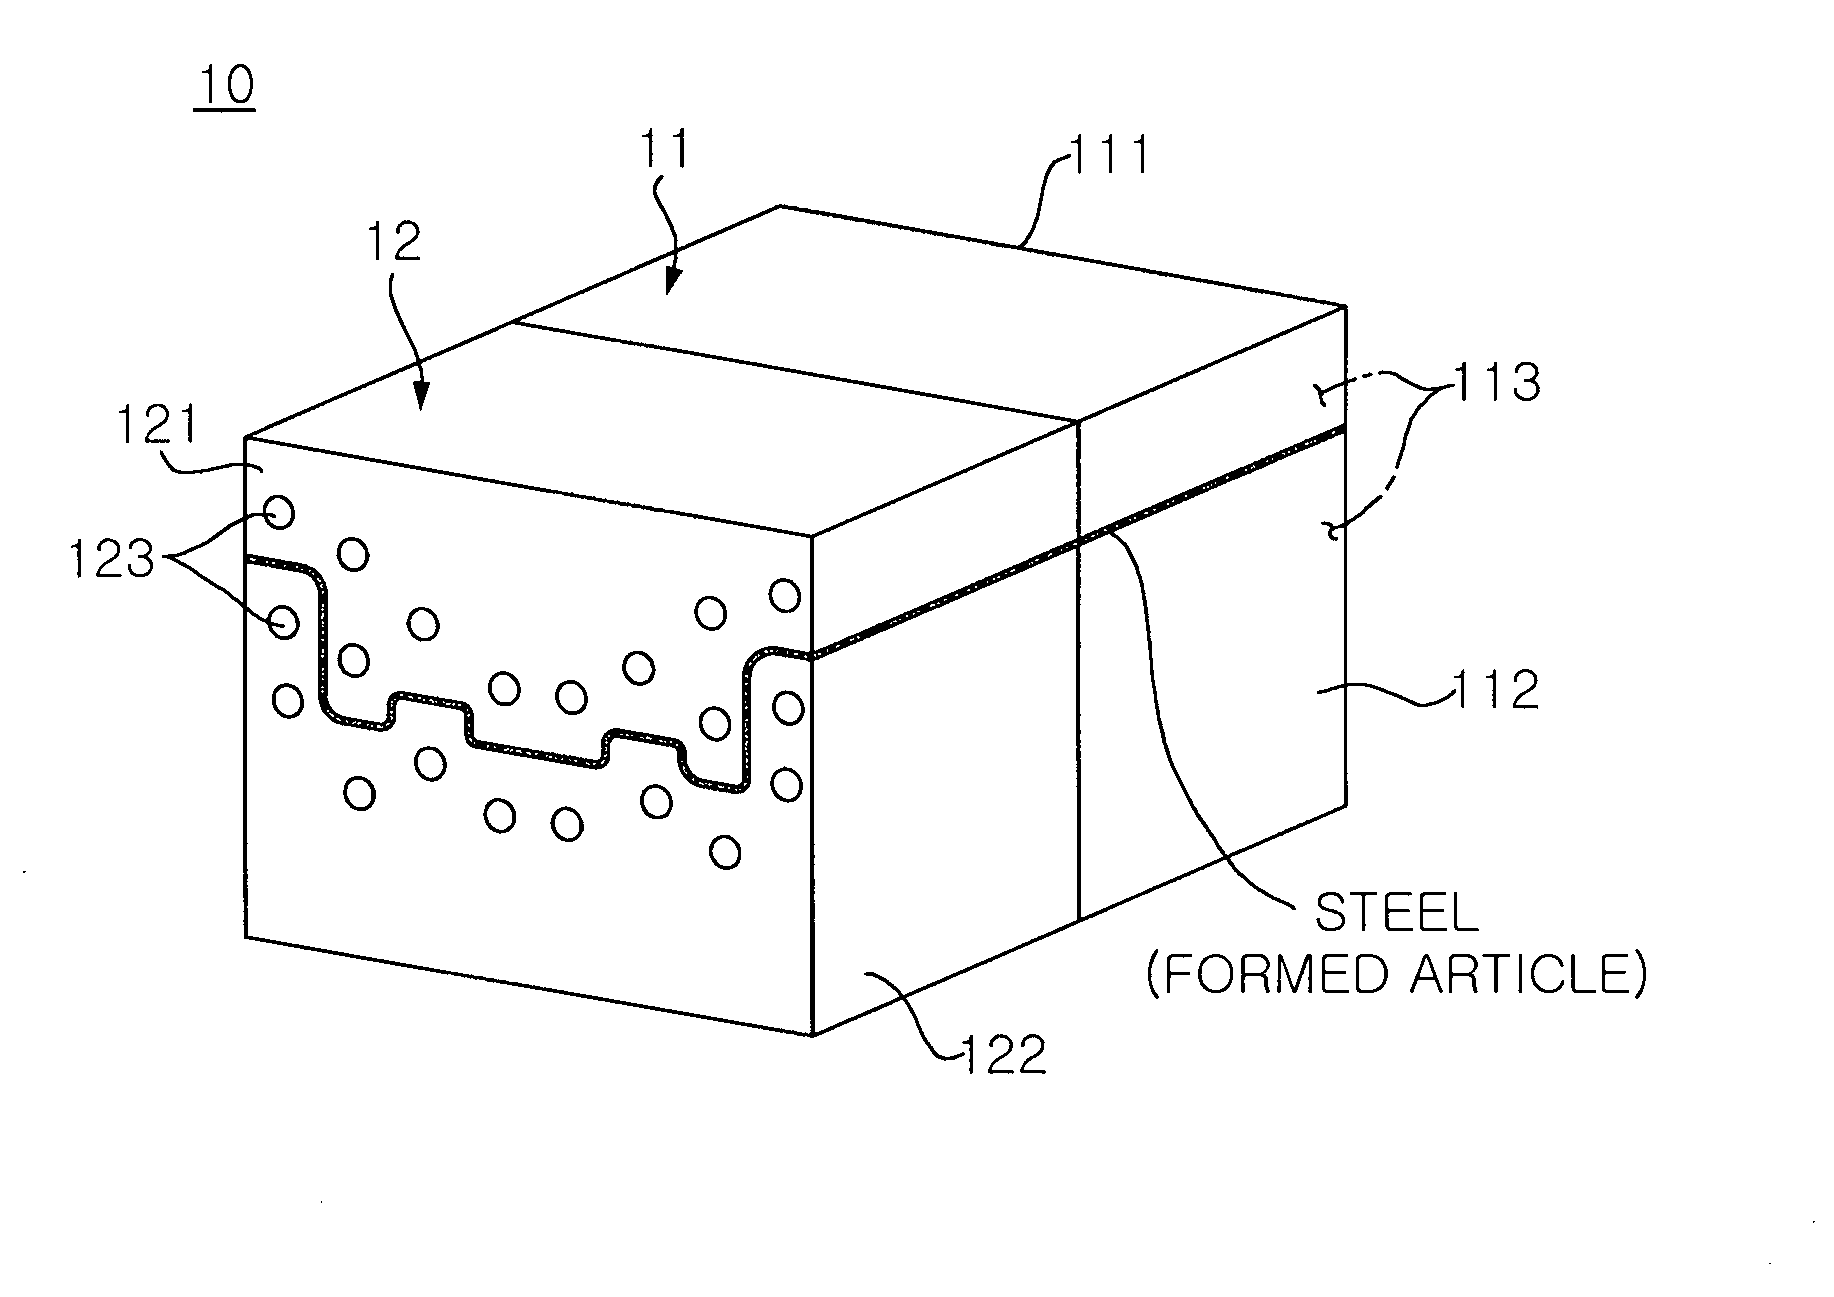 Method of Manufacturing Multi Physical Properties Part